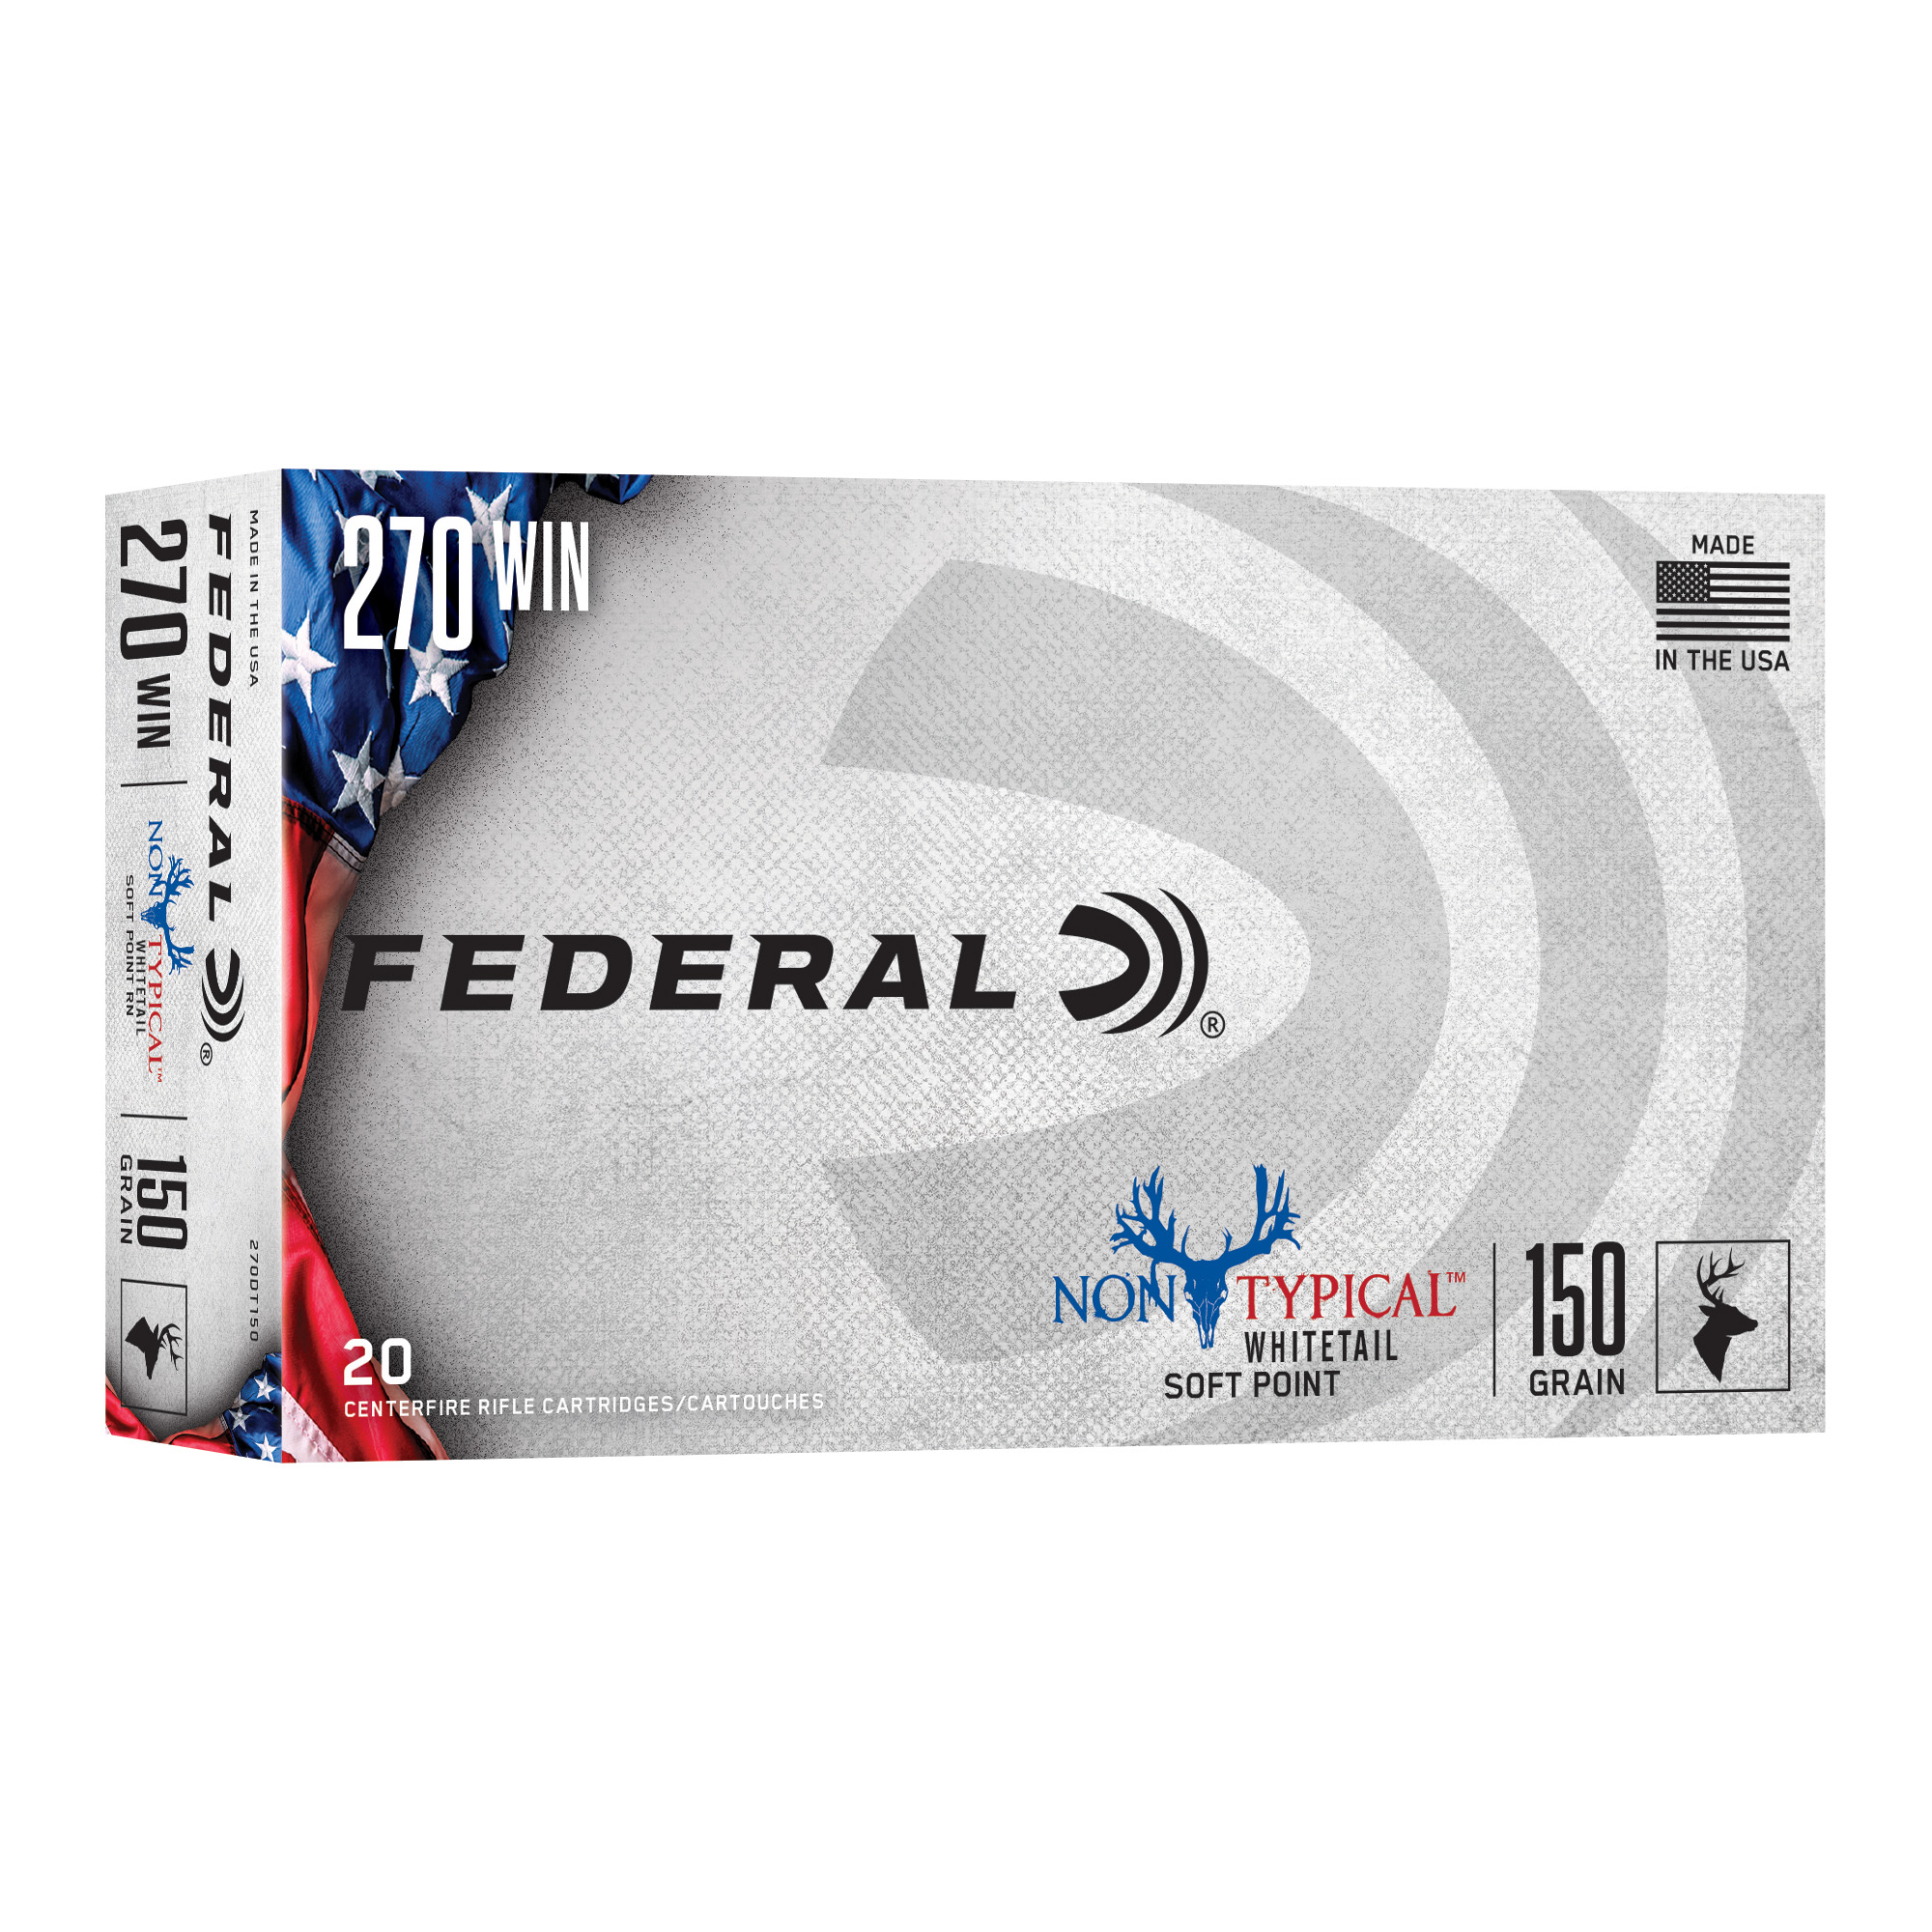 Federal, Non Typical, 270 Win, 150Gr, Soft Point, 20 Round Box